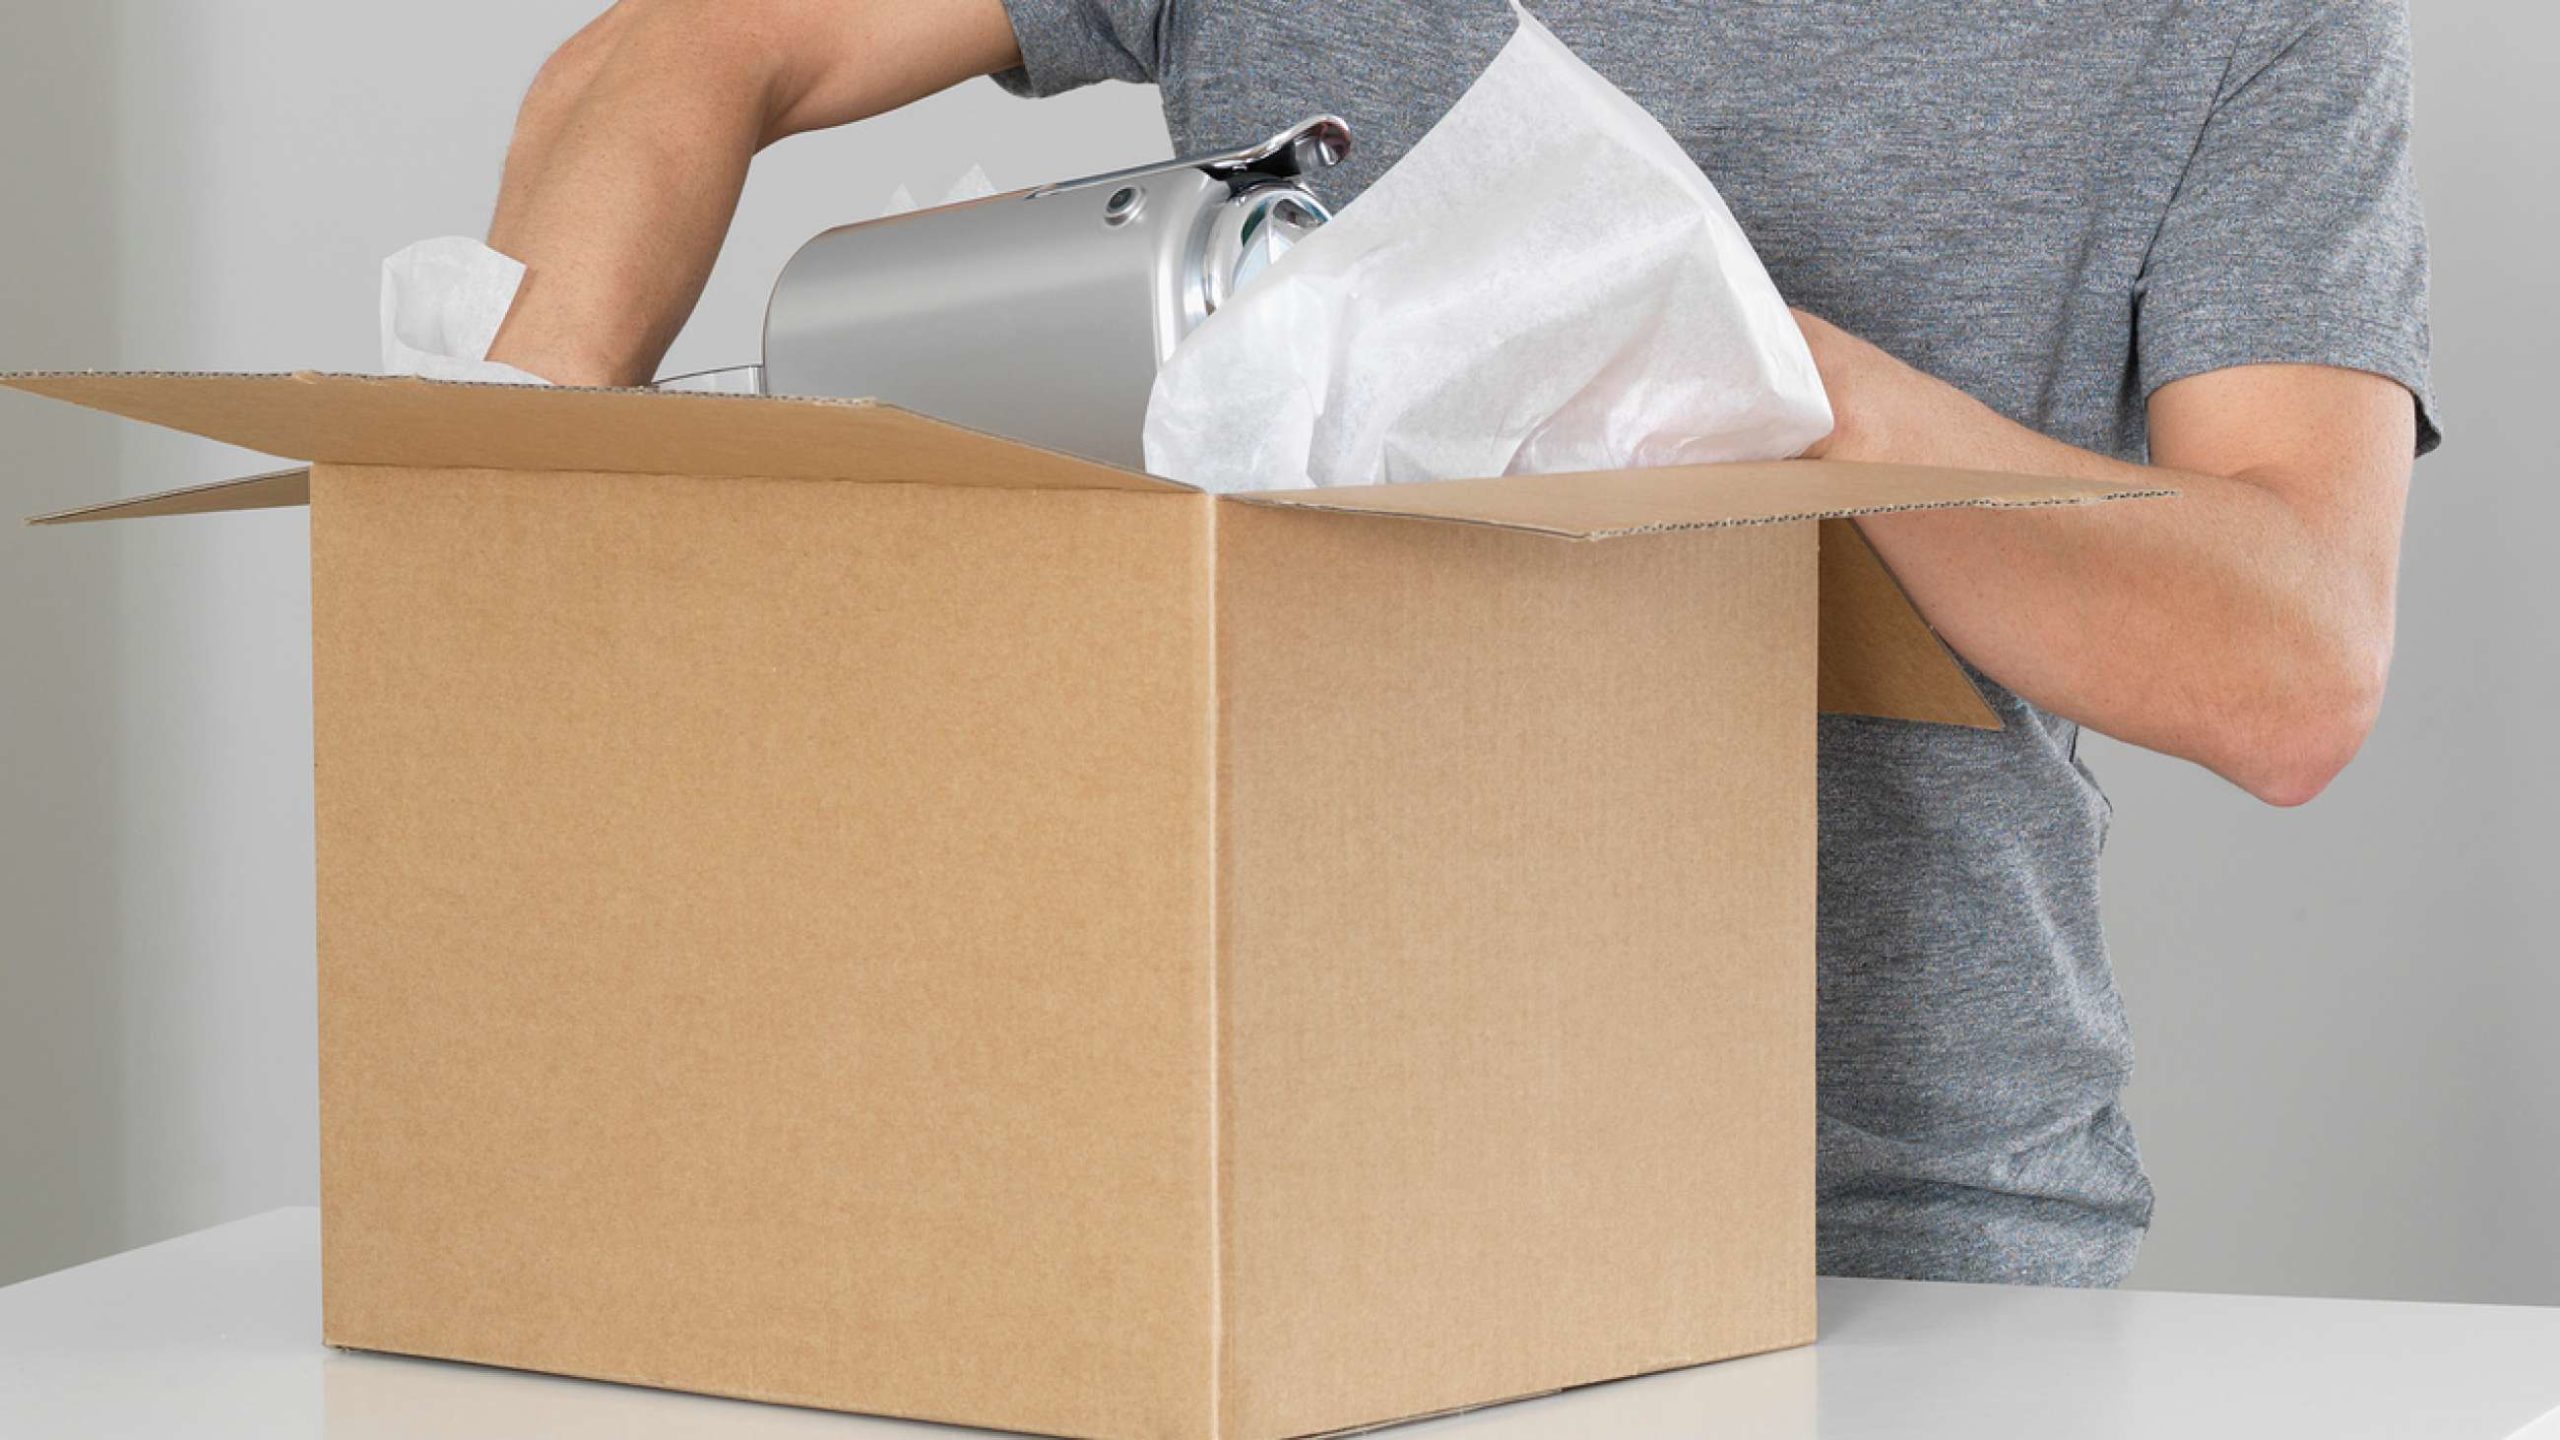 Boxed packaged goods: How to launch this